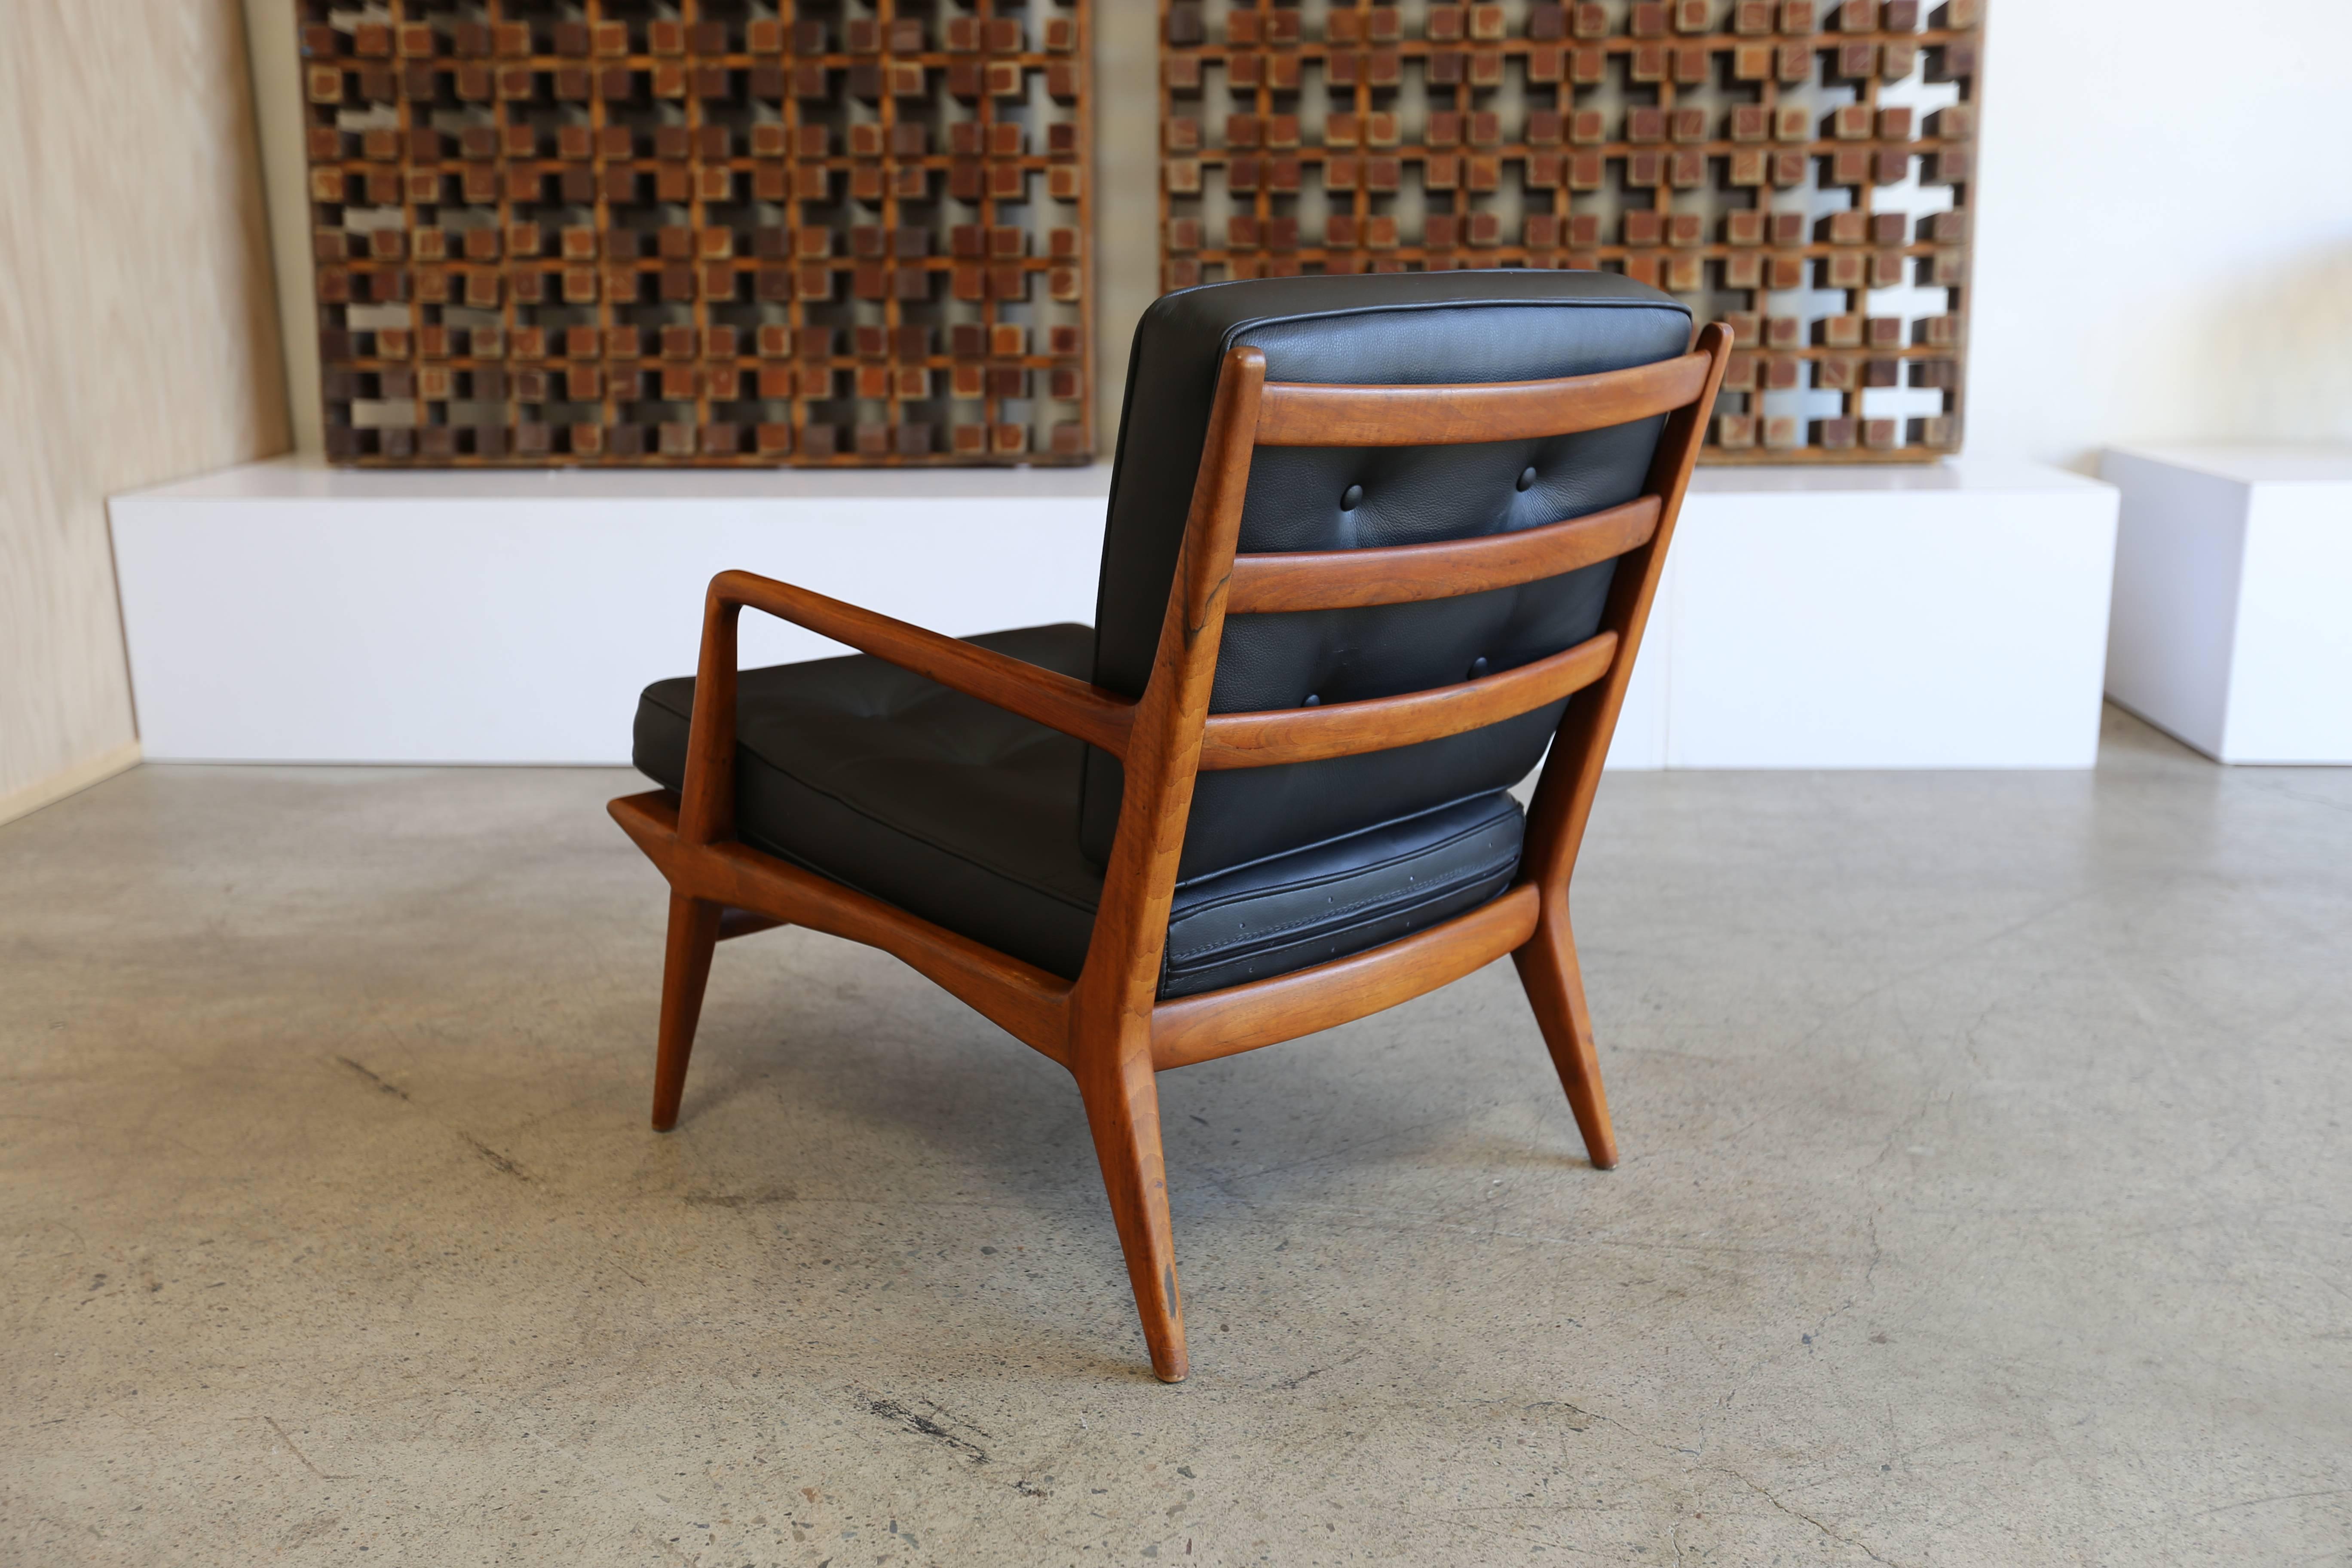 Leather Carlo di Carli Lounge Chair for M. Singer & Sons, 1950s = MOVING SALE !!!!!